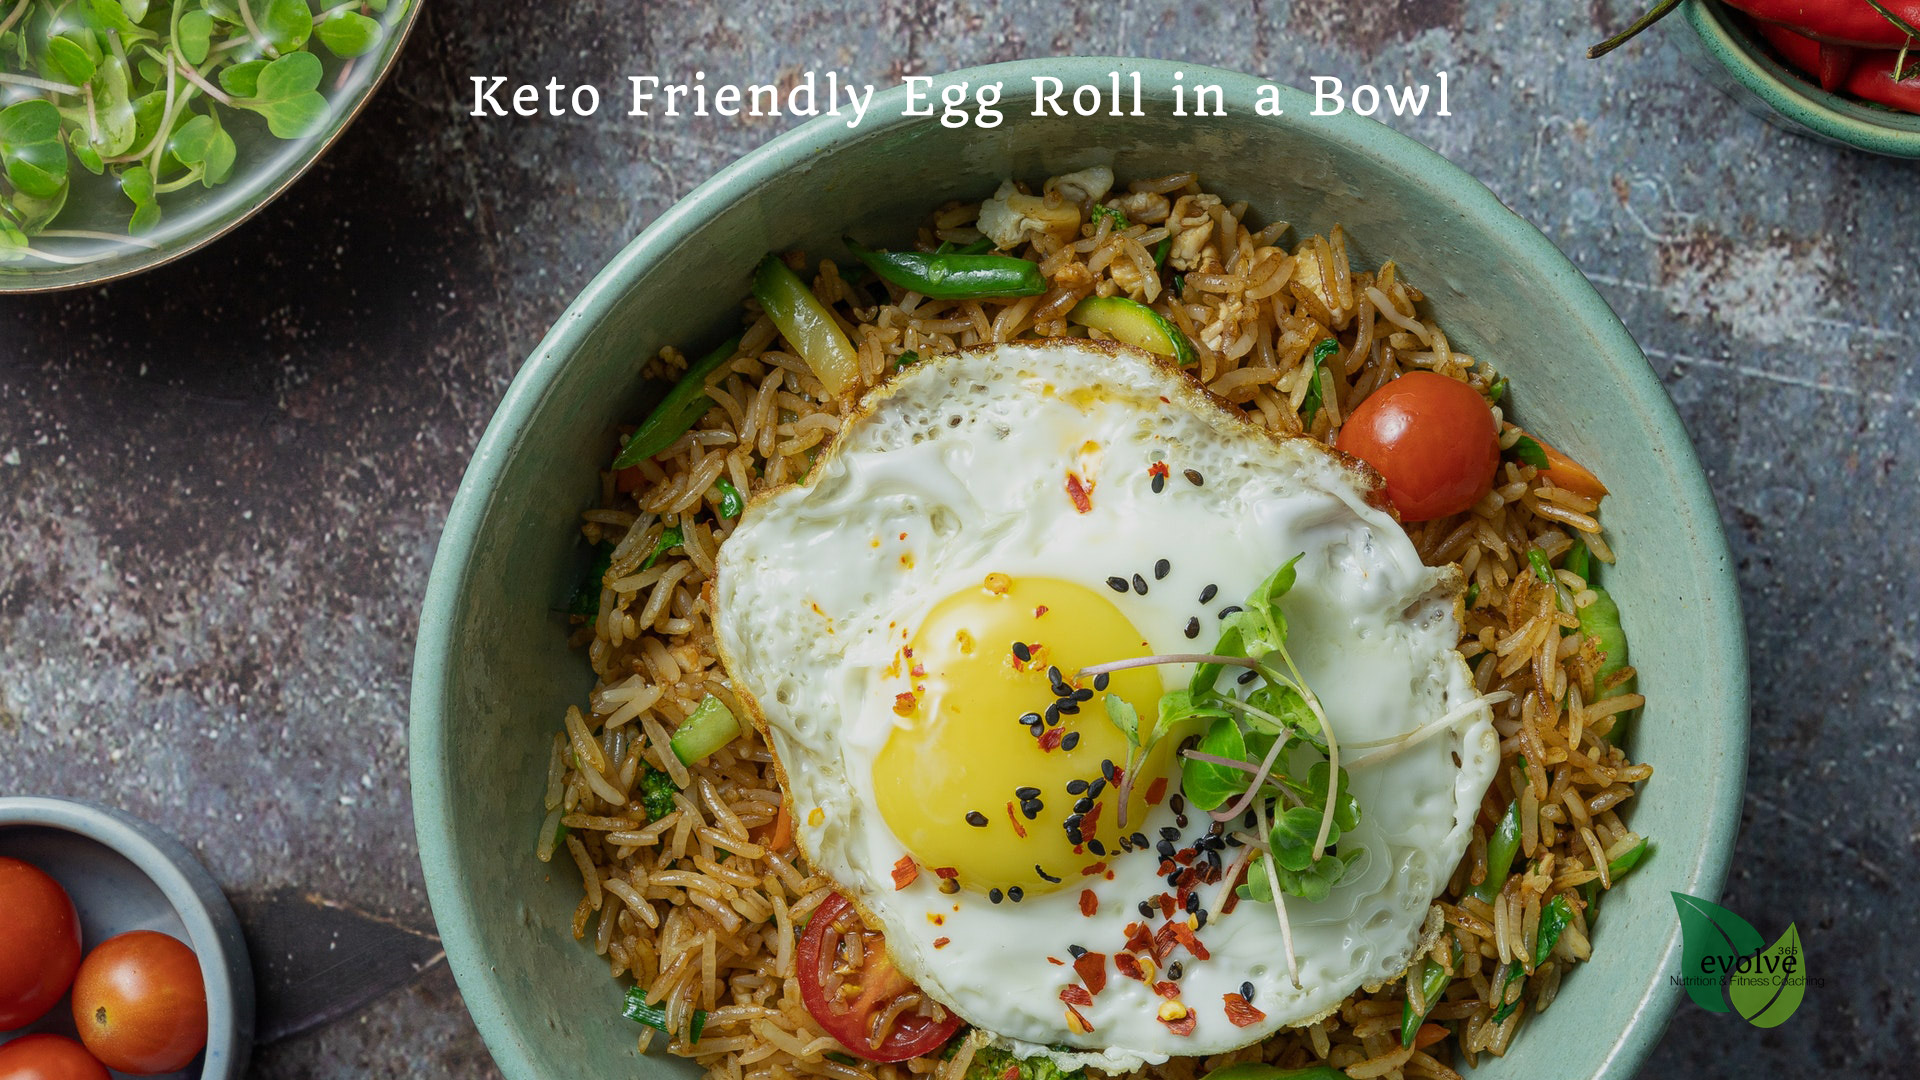 Keto Friendly Egg Roll in a Bowl featured